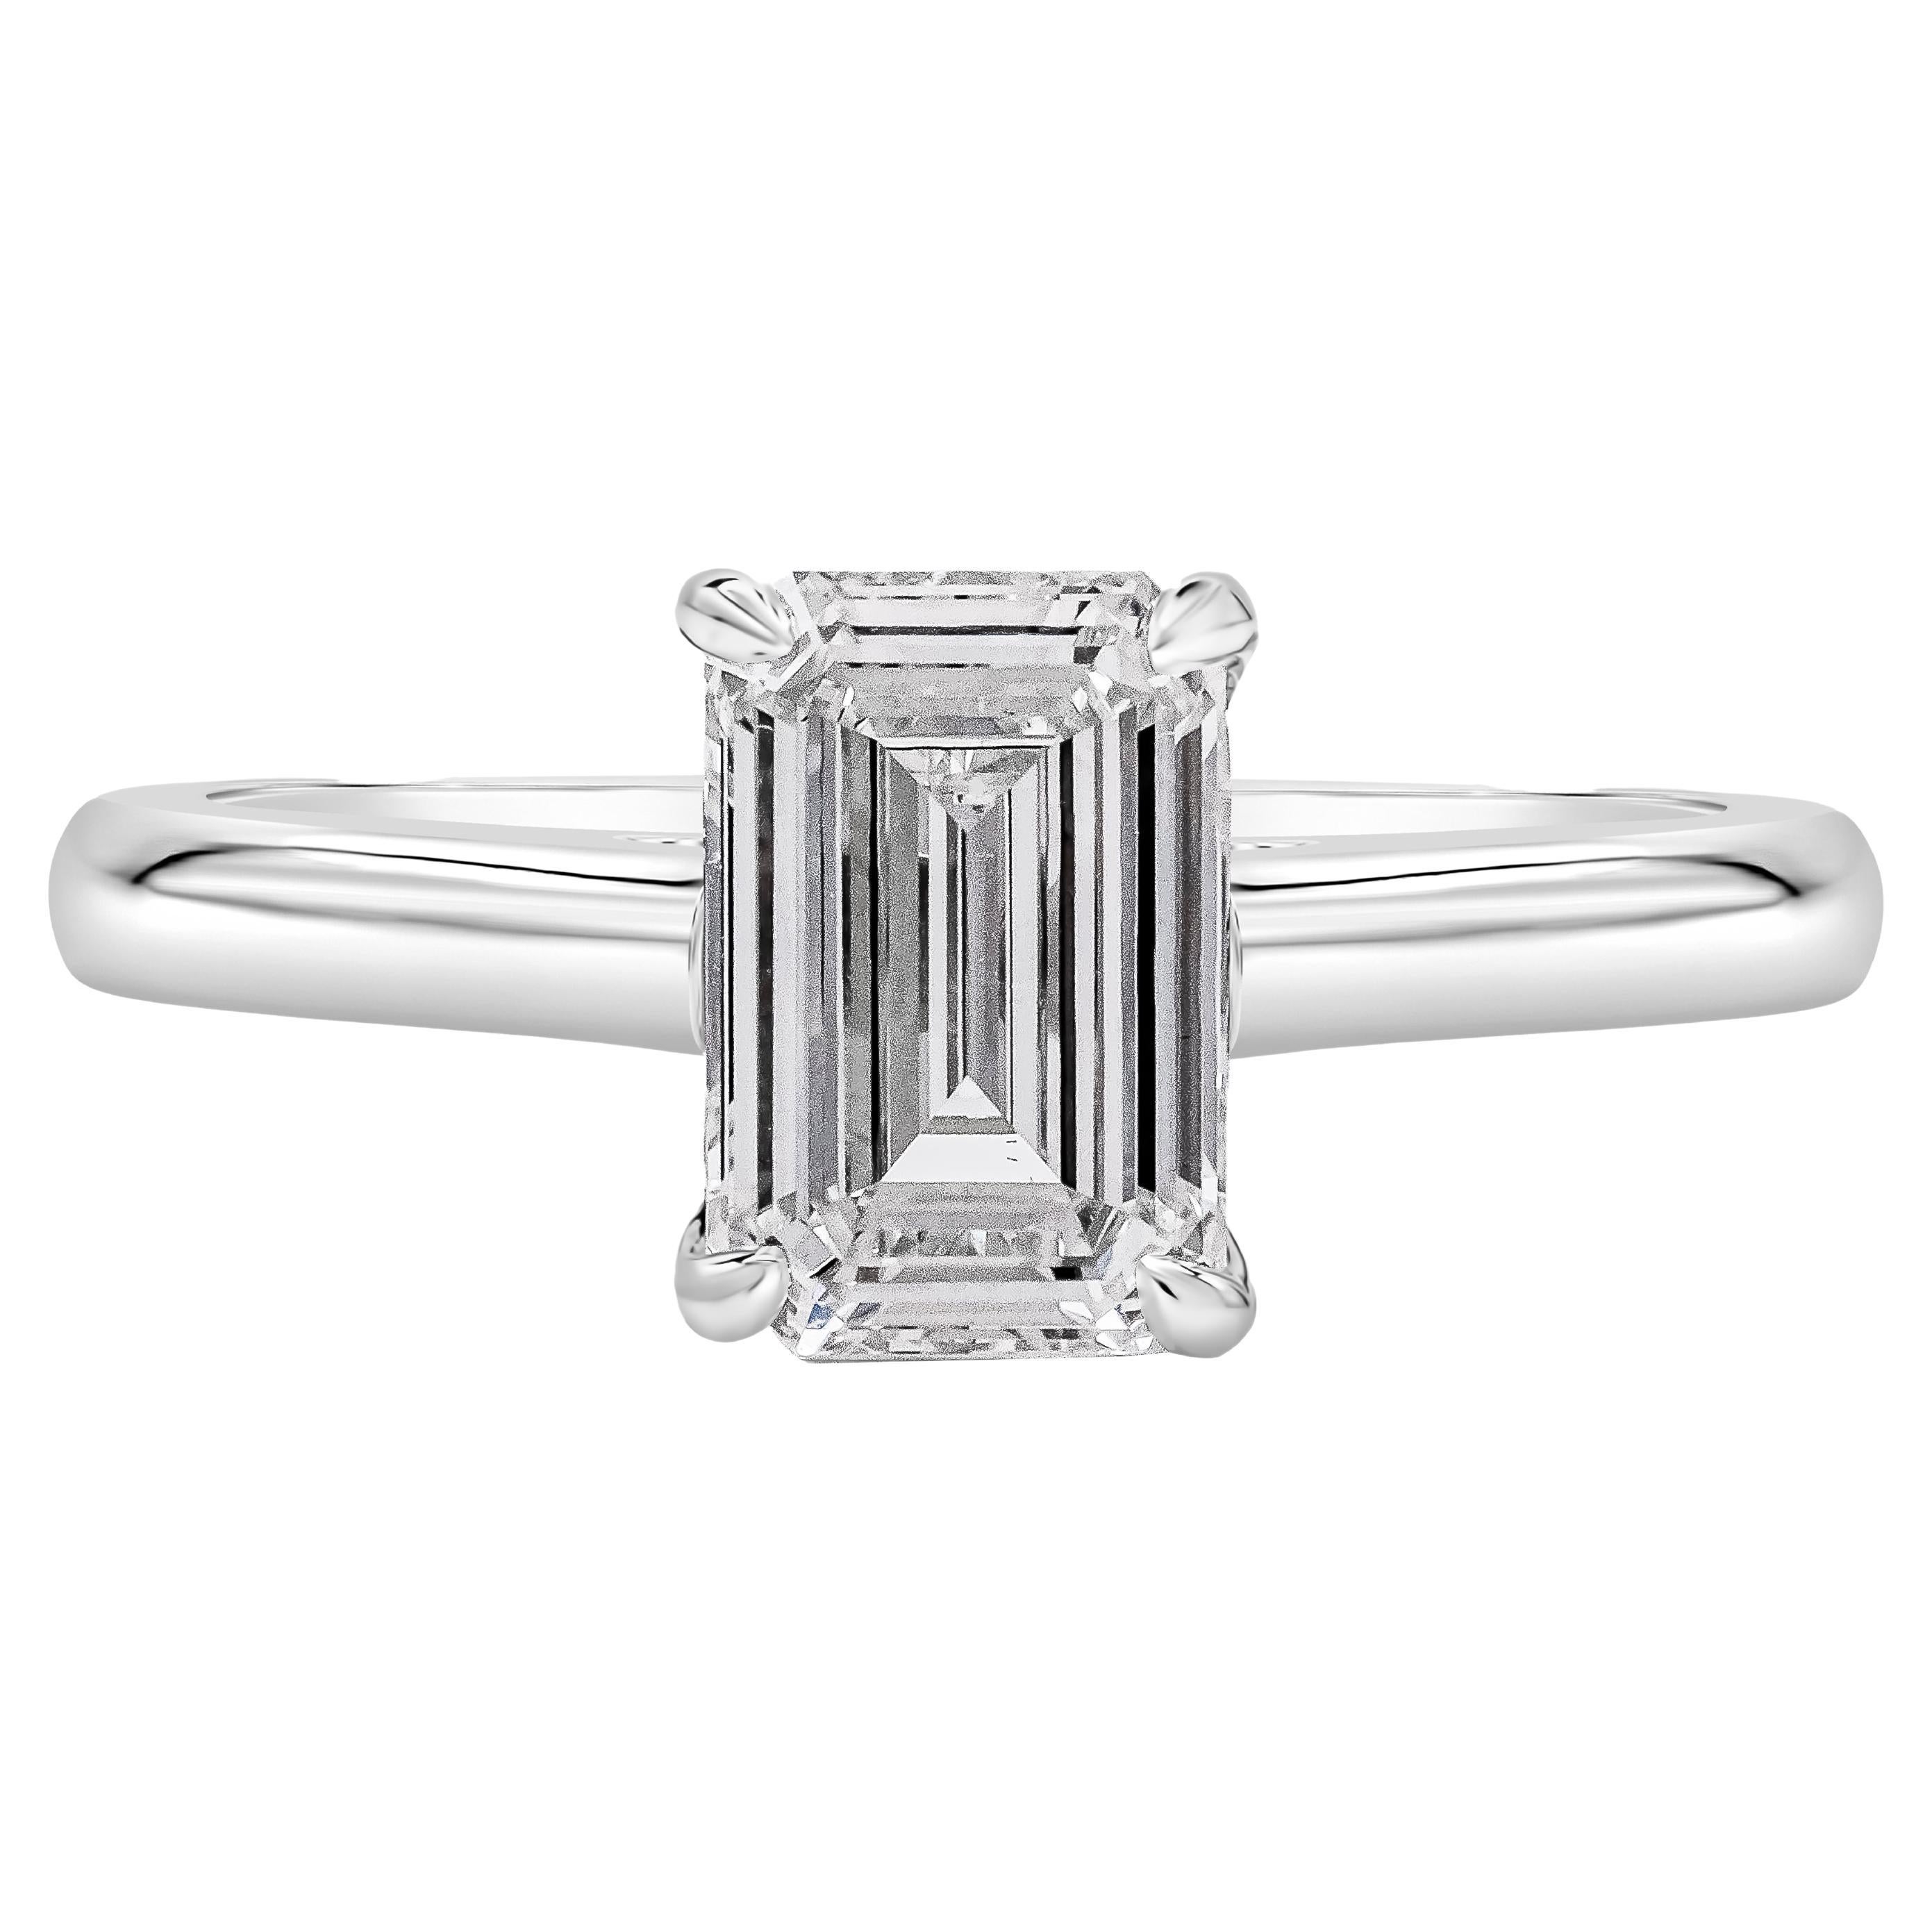 GIA Certified 1.27 Carats Total Emerald Cut Diamond Solitaire Engagement Ring